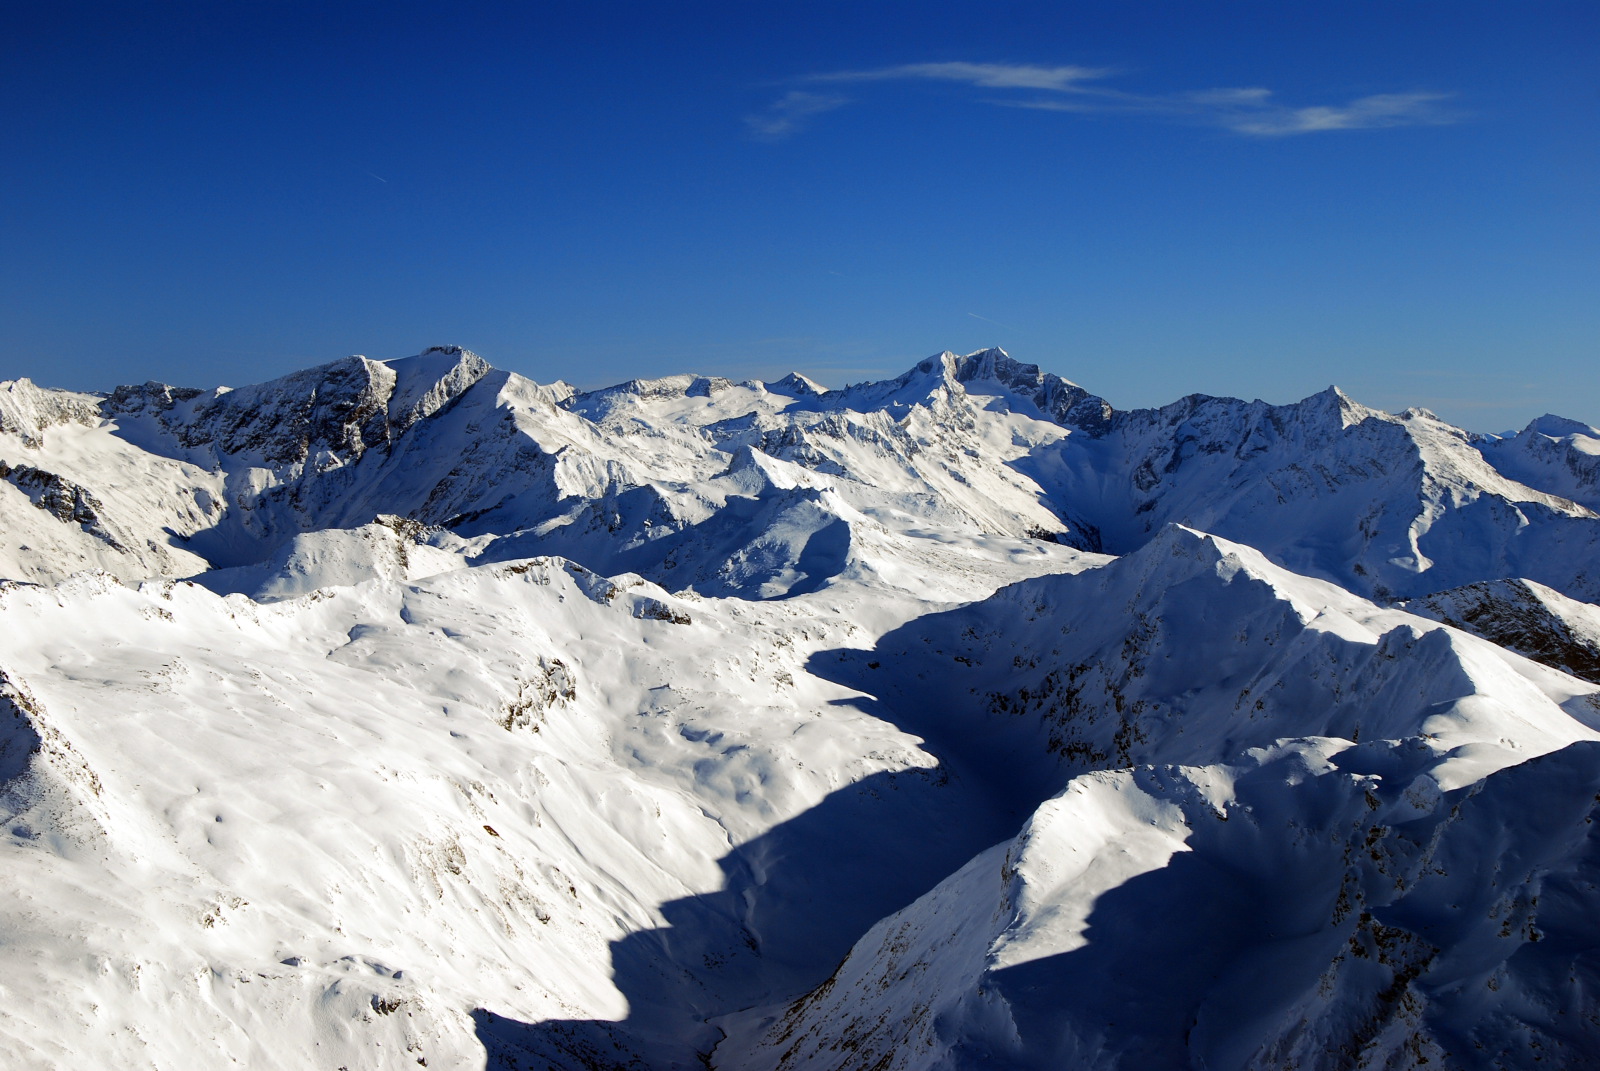 Looking-towards-Ankogel-from-the-top-of-Schareck.jpg